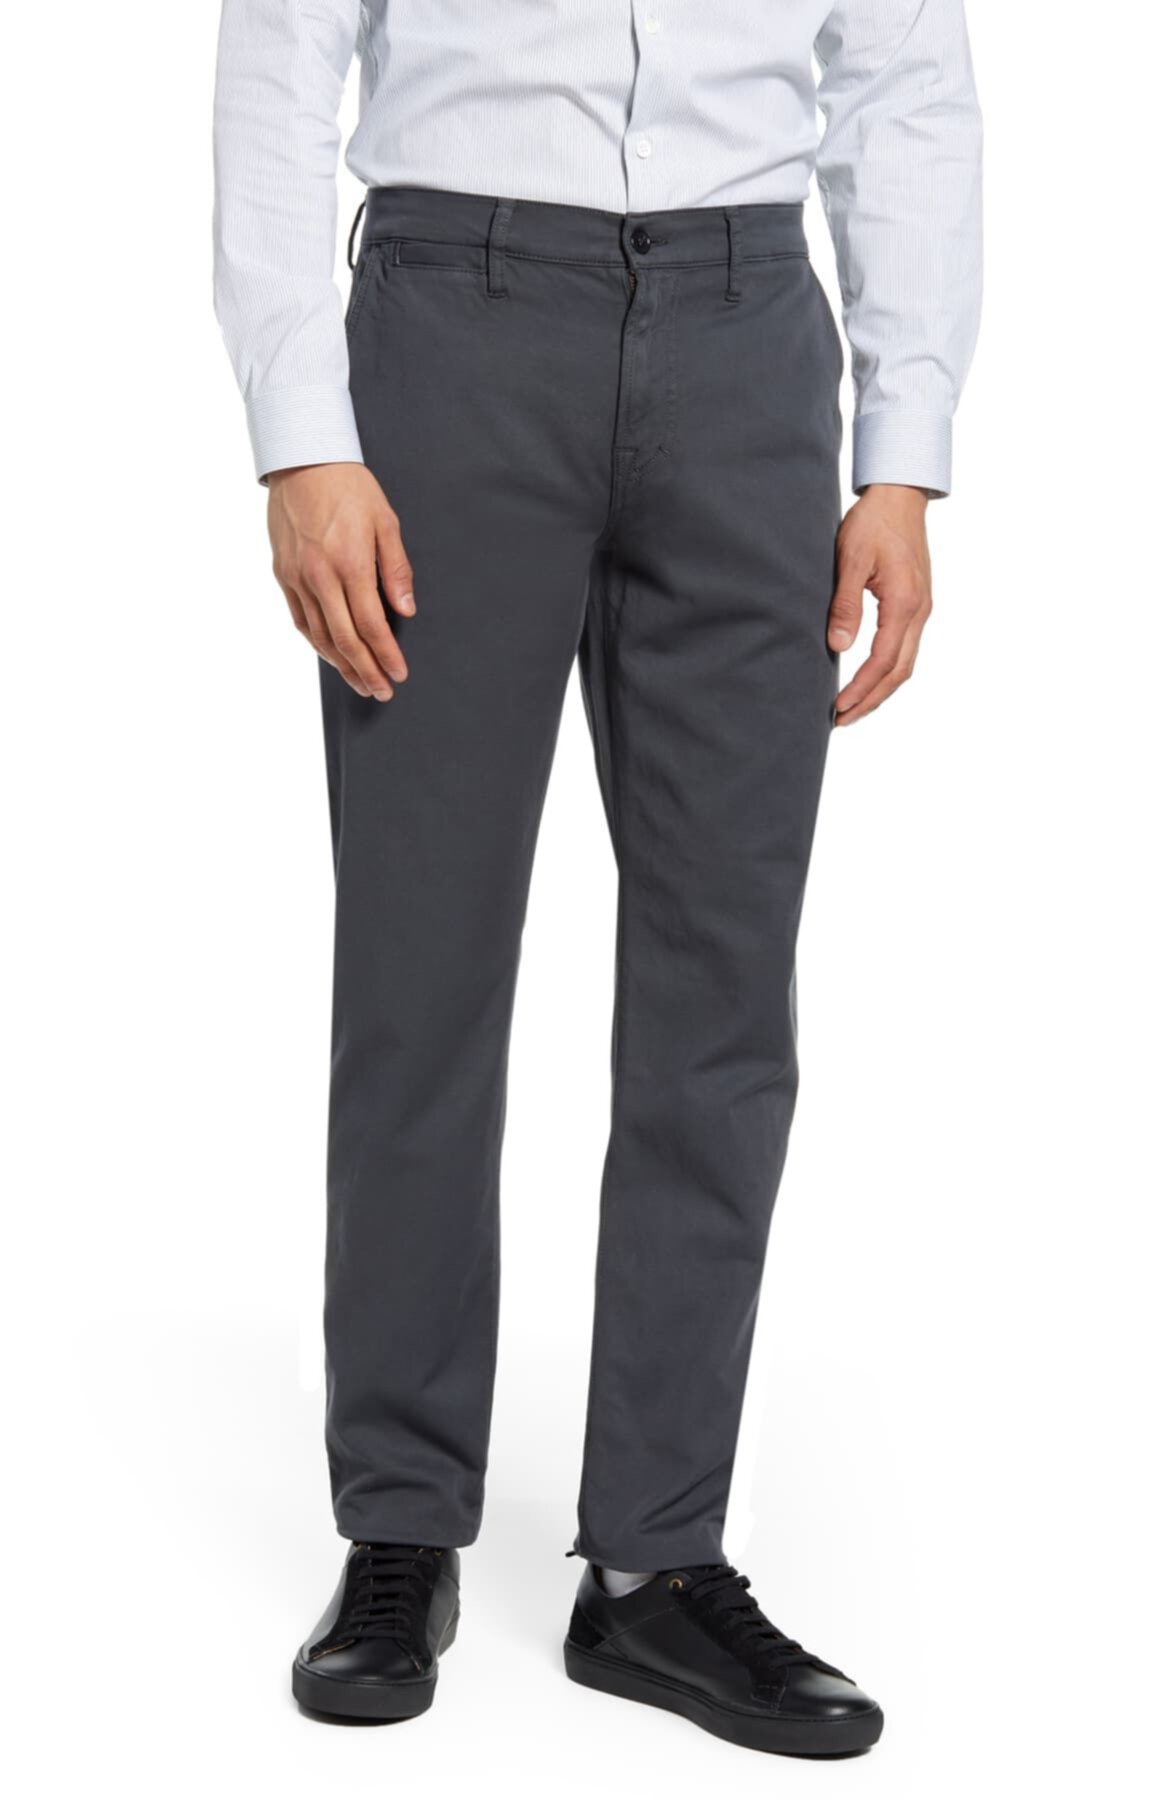 Adrien Go-To Chino Брюки 7 For All Mankind